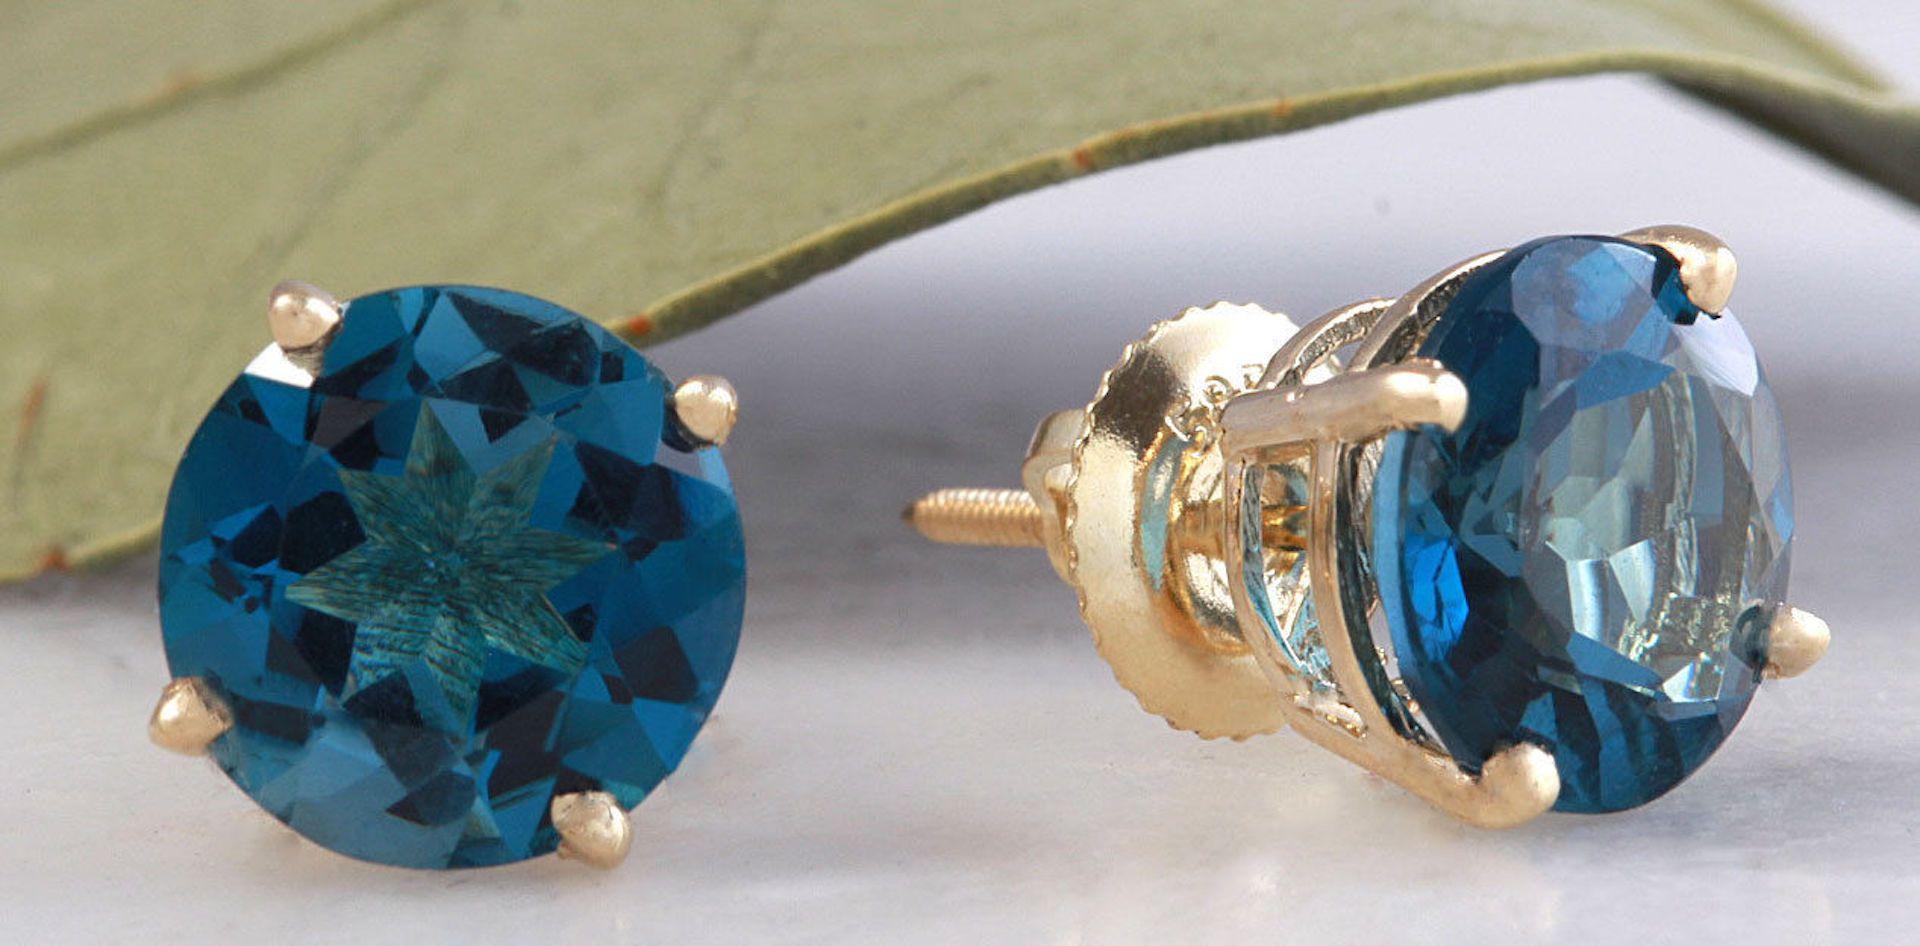 Exquisite Top Quality 4.25 Carats Natural London Blue Topaz 14K Solid Yellow Gold Stud Earrings

Amazing looking piece!

Total Natural Round Cut London Blue Topaz Weight: Approx. 4.25 Carats (both earrings)

London Blue Topaz Measures: 8mm

Topaz